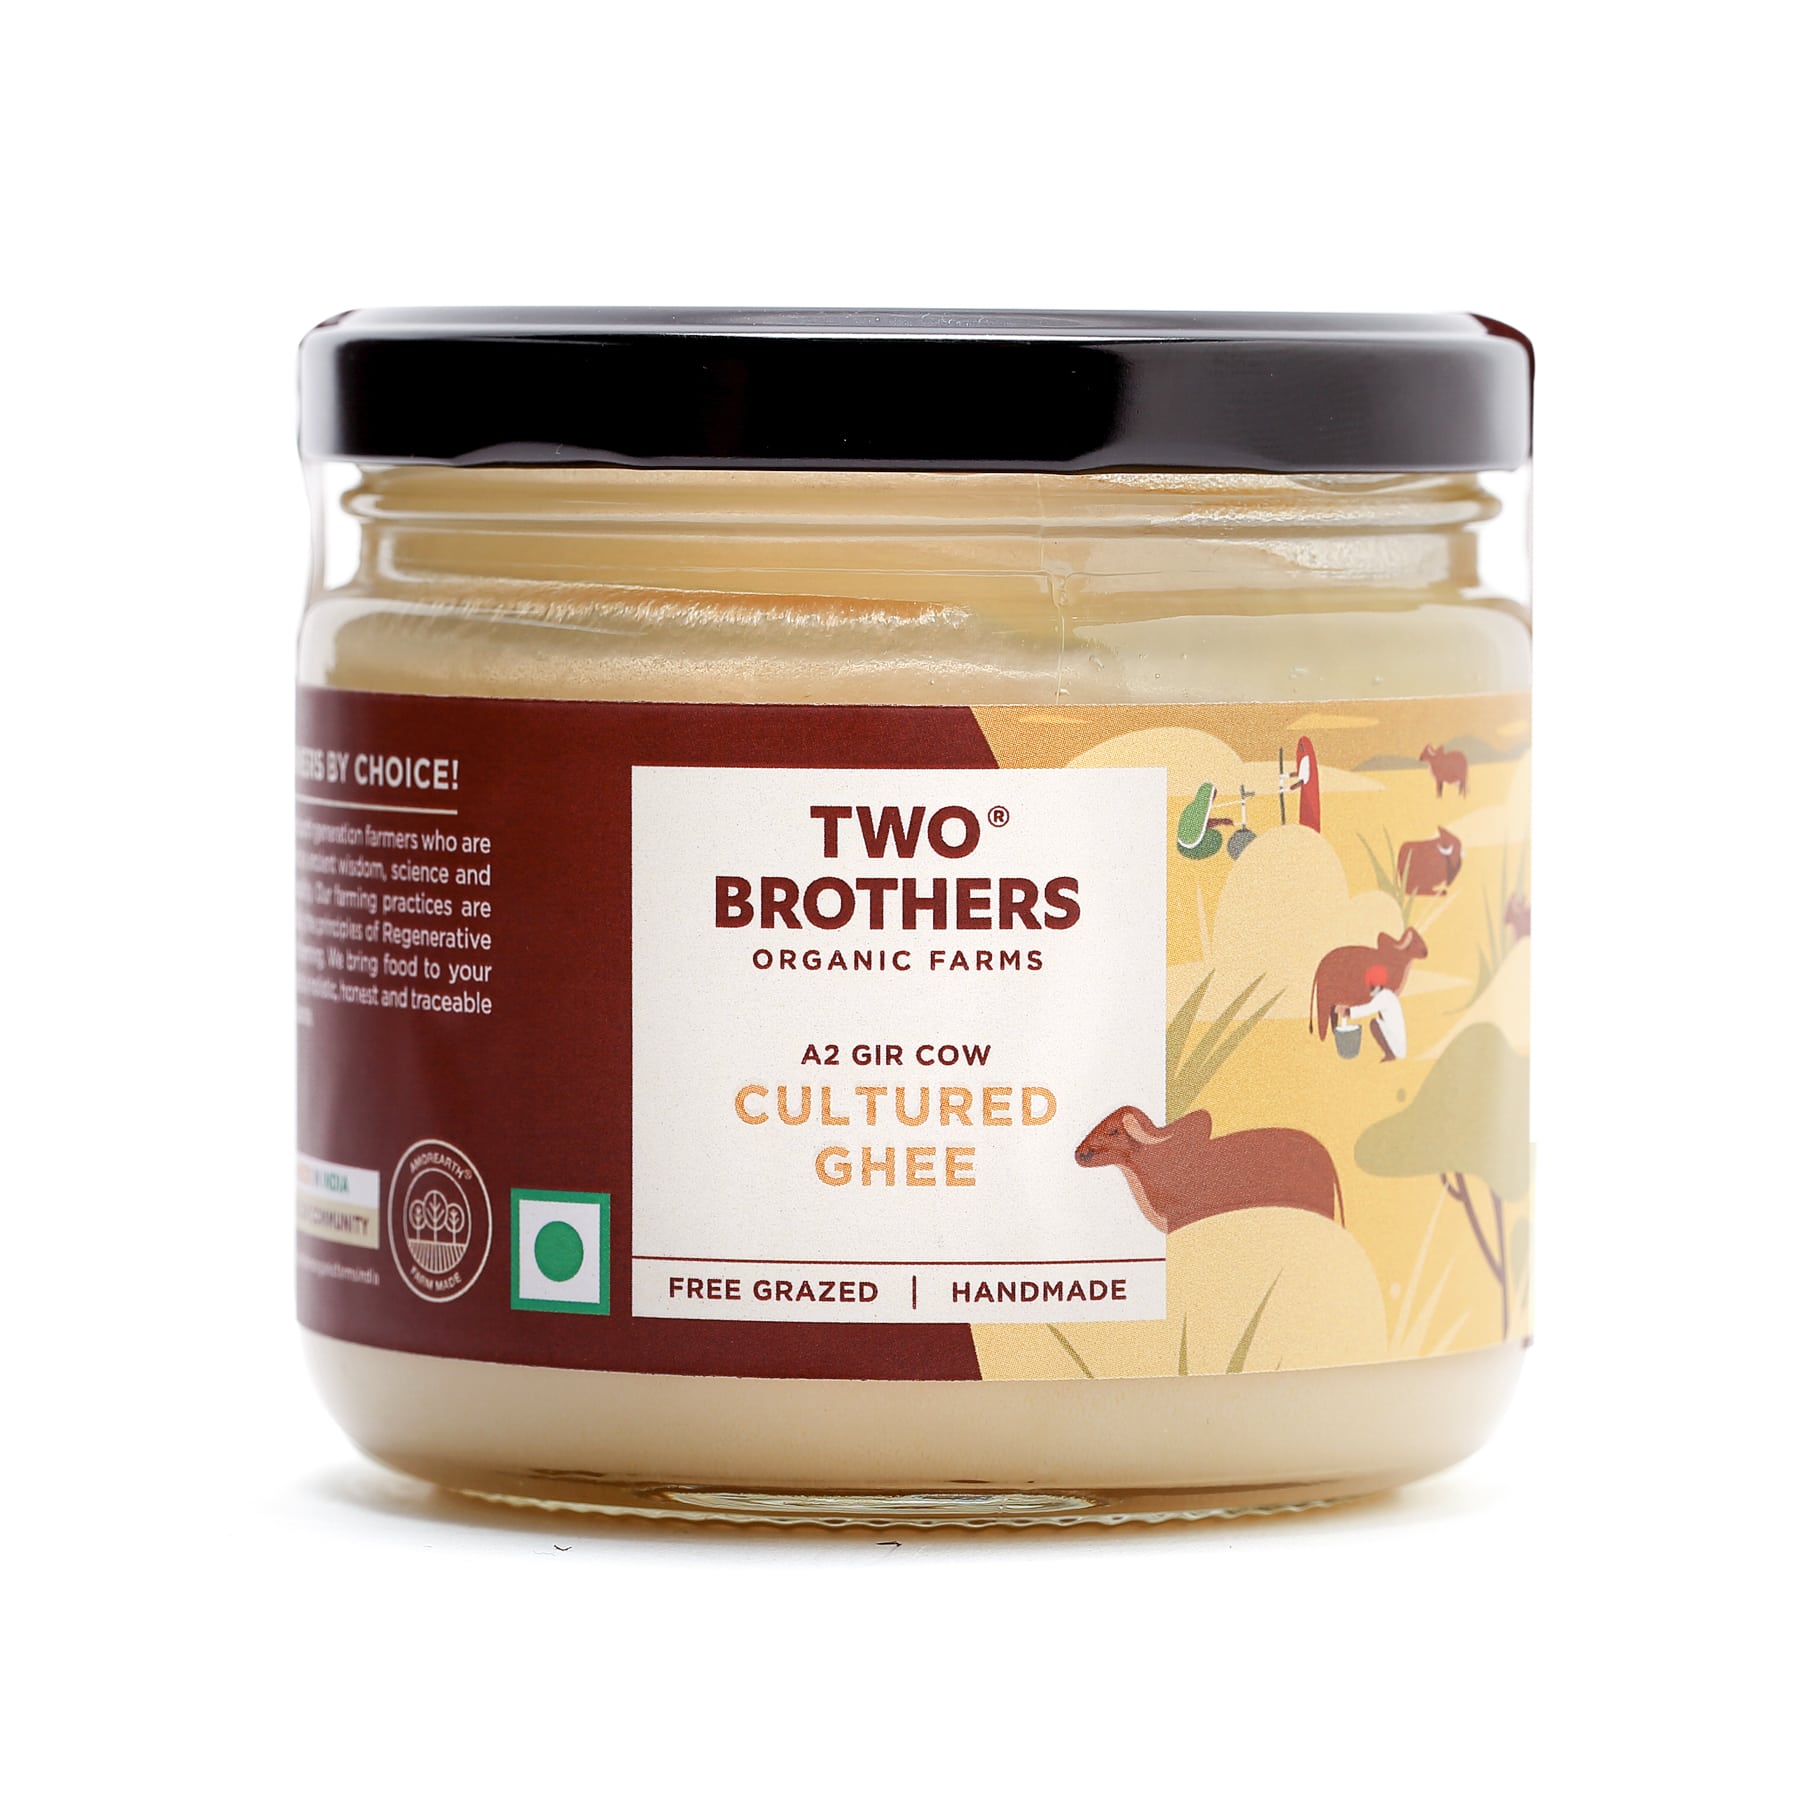 buy Two Brothers Amorearth Desi Gir Cow A2 Ghee online